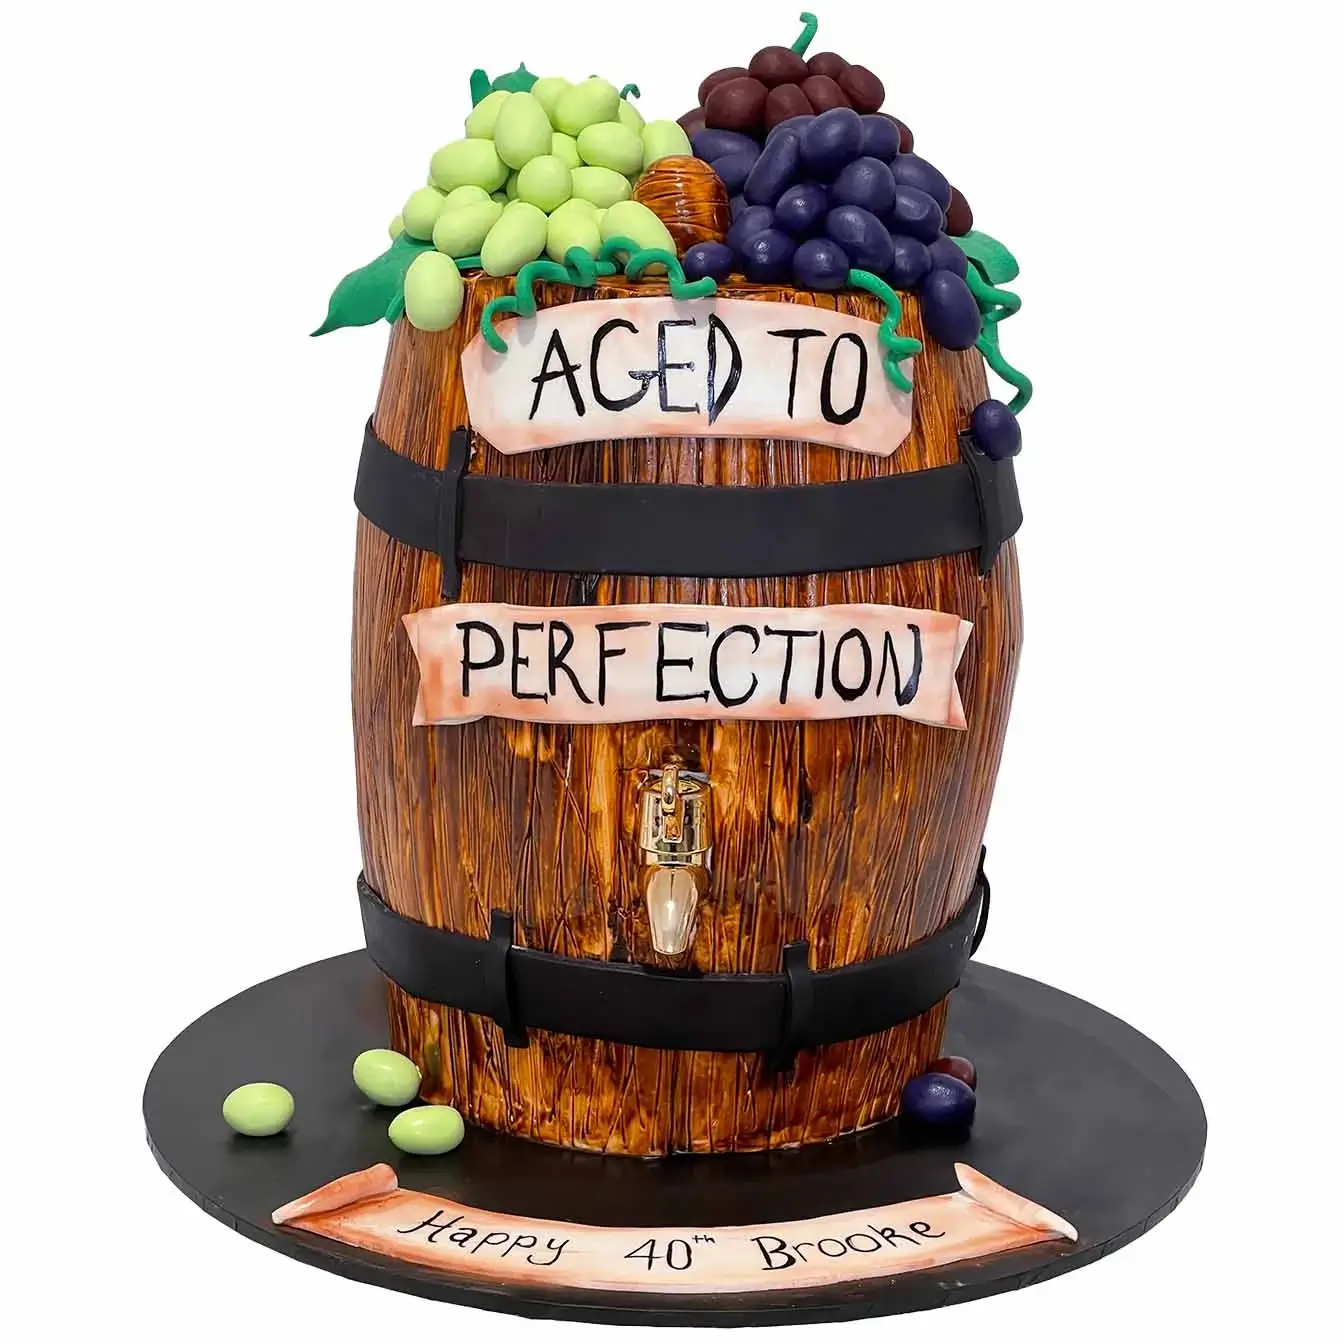 Wine Barrel Cake - A cake resembling a wine barrel with a functioning tap, a unique centerpiece for wine lovers and celebrations filled with elegance and flavour.